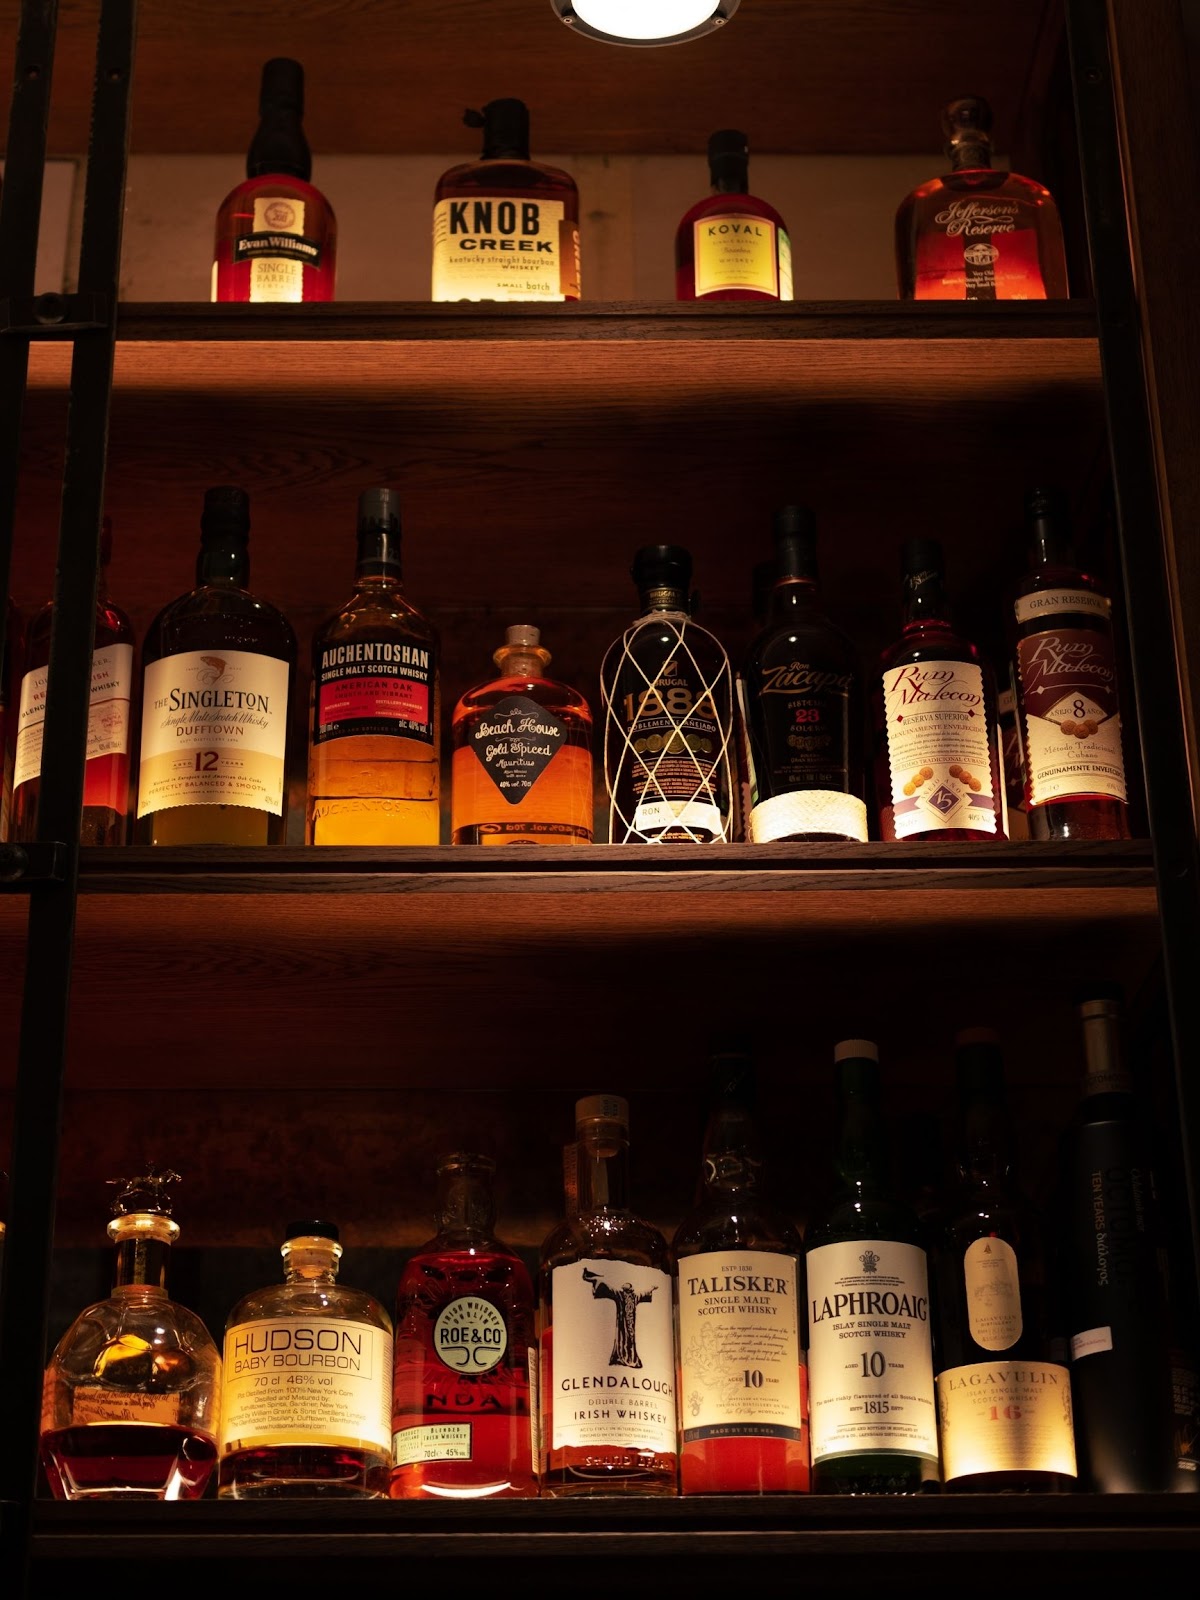 ideas for building a bourbon gift guide from a picture of home bar.